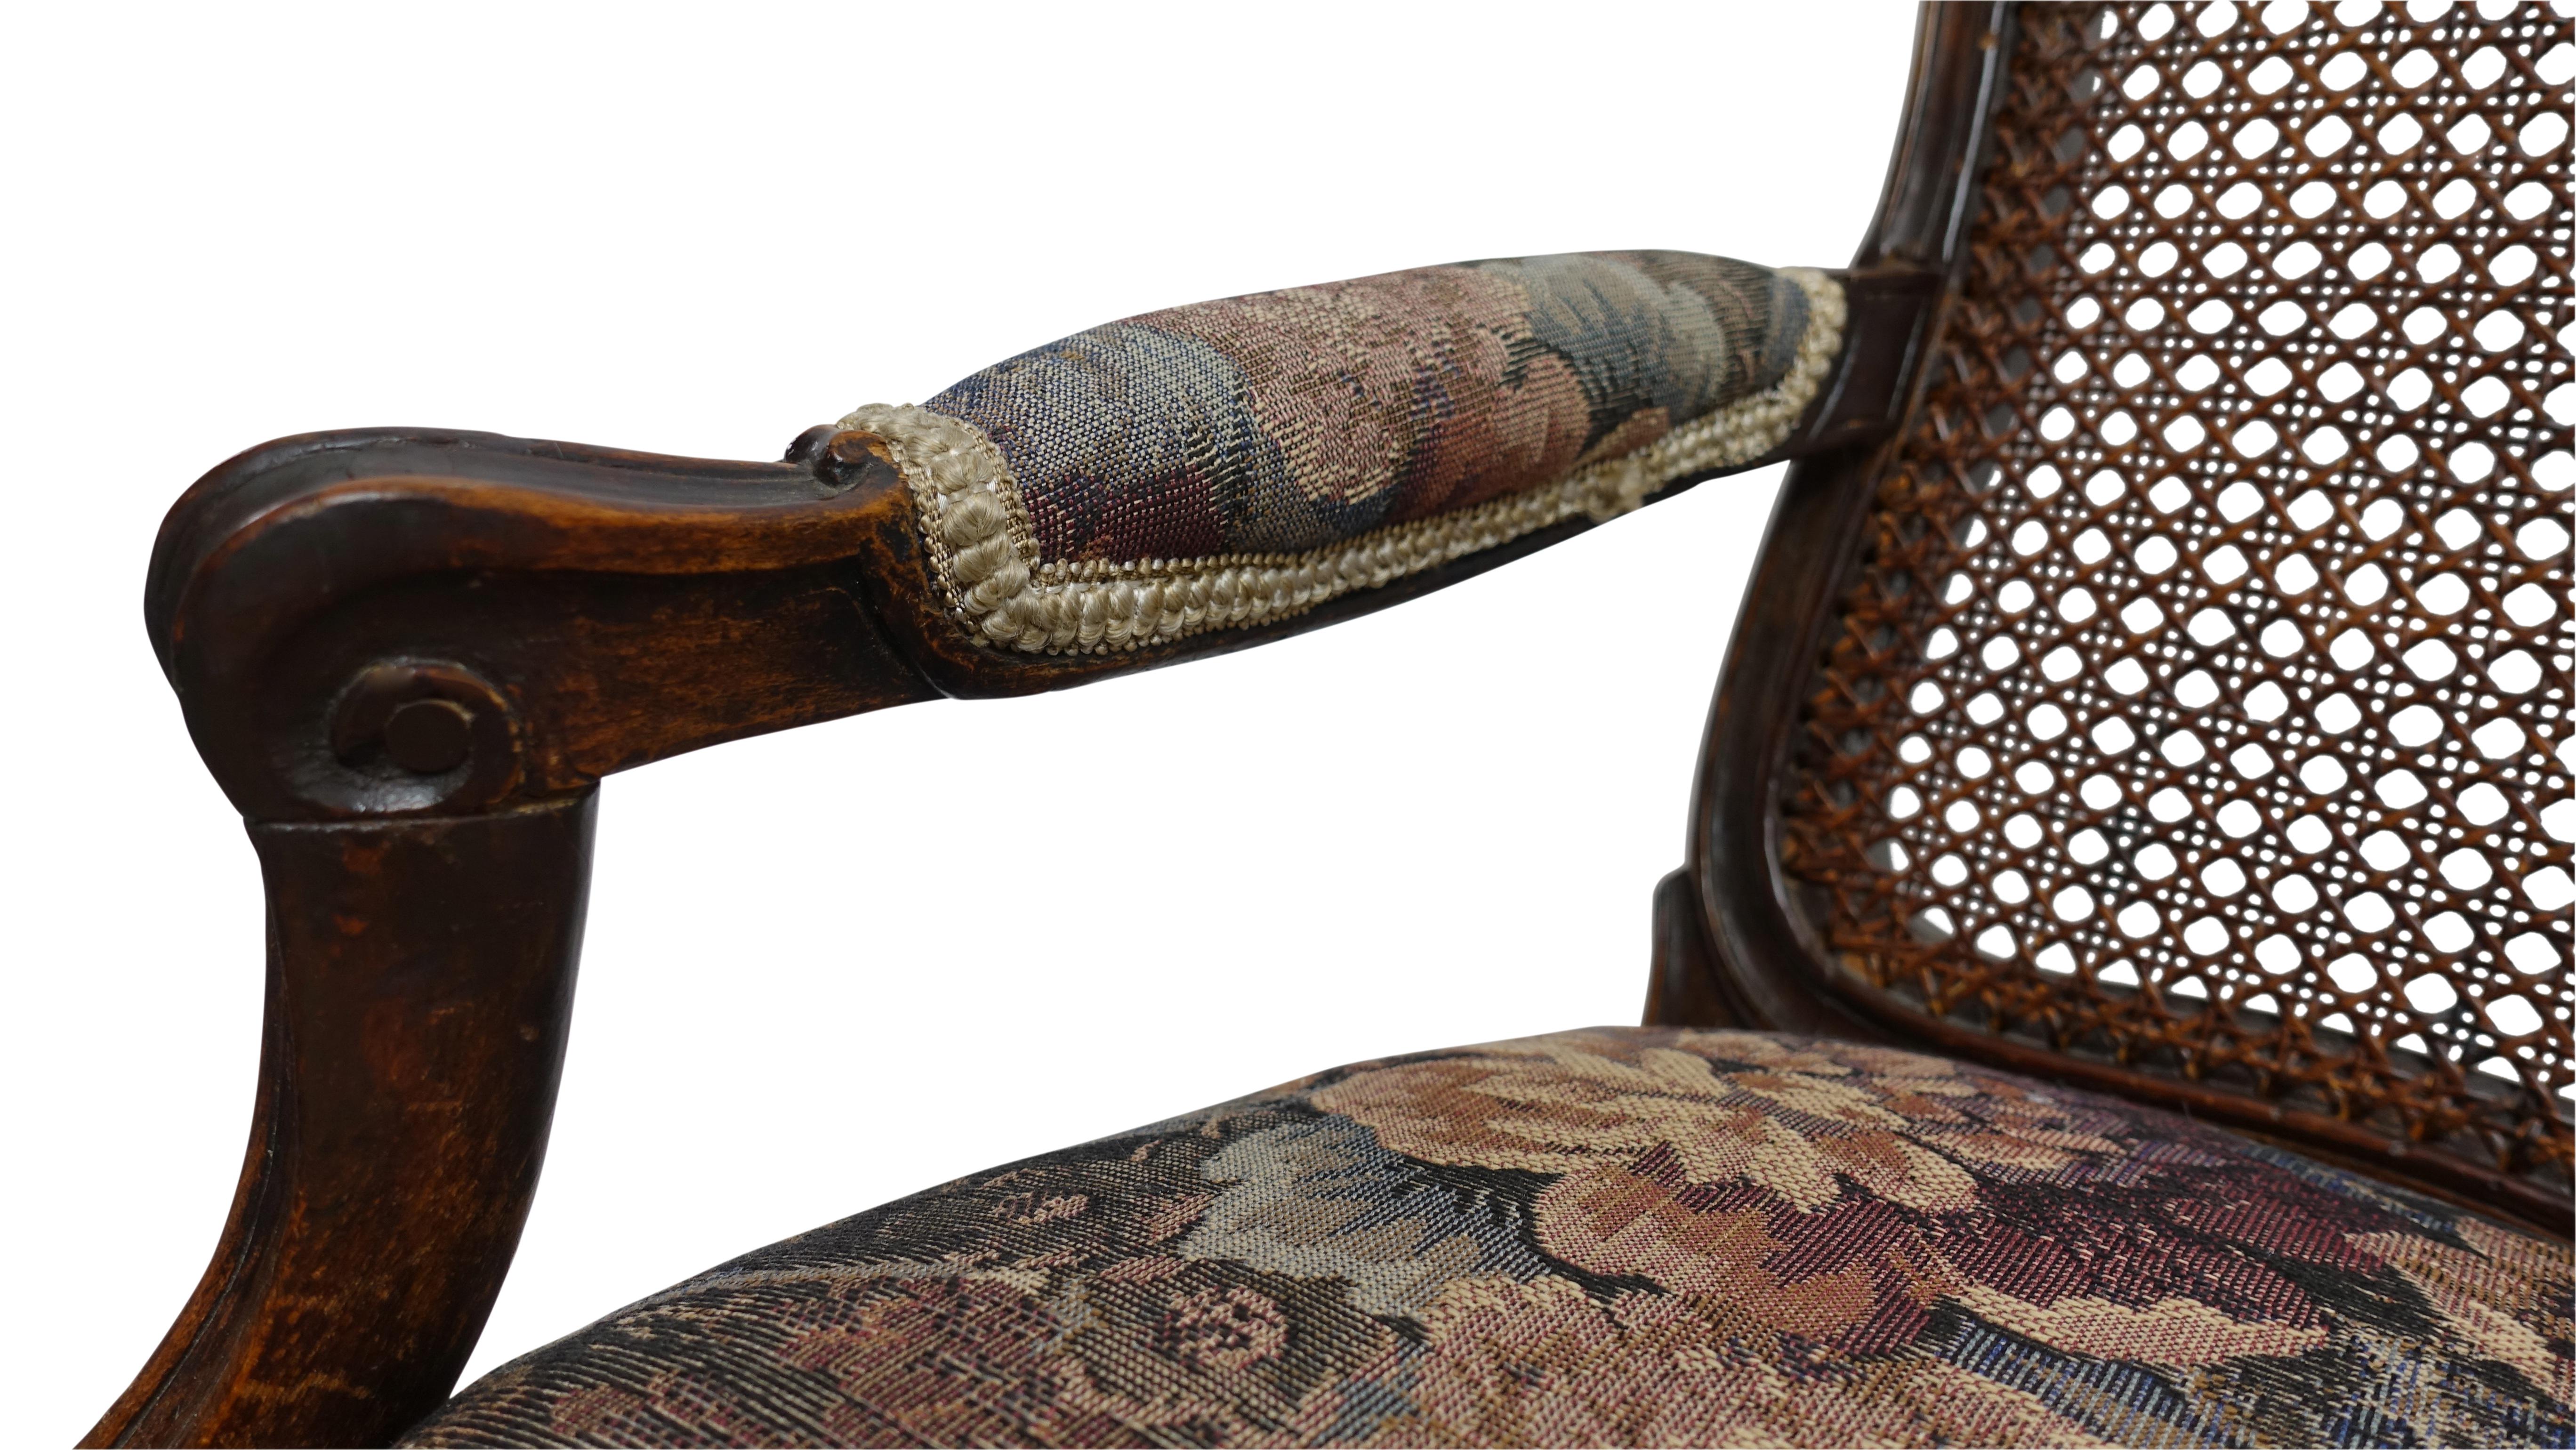 Late 18th Century Pair of Regence Armchairs with Cane Seats and Backrests, 18th Century